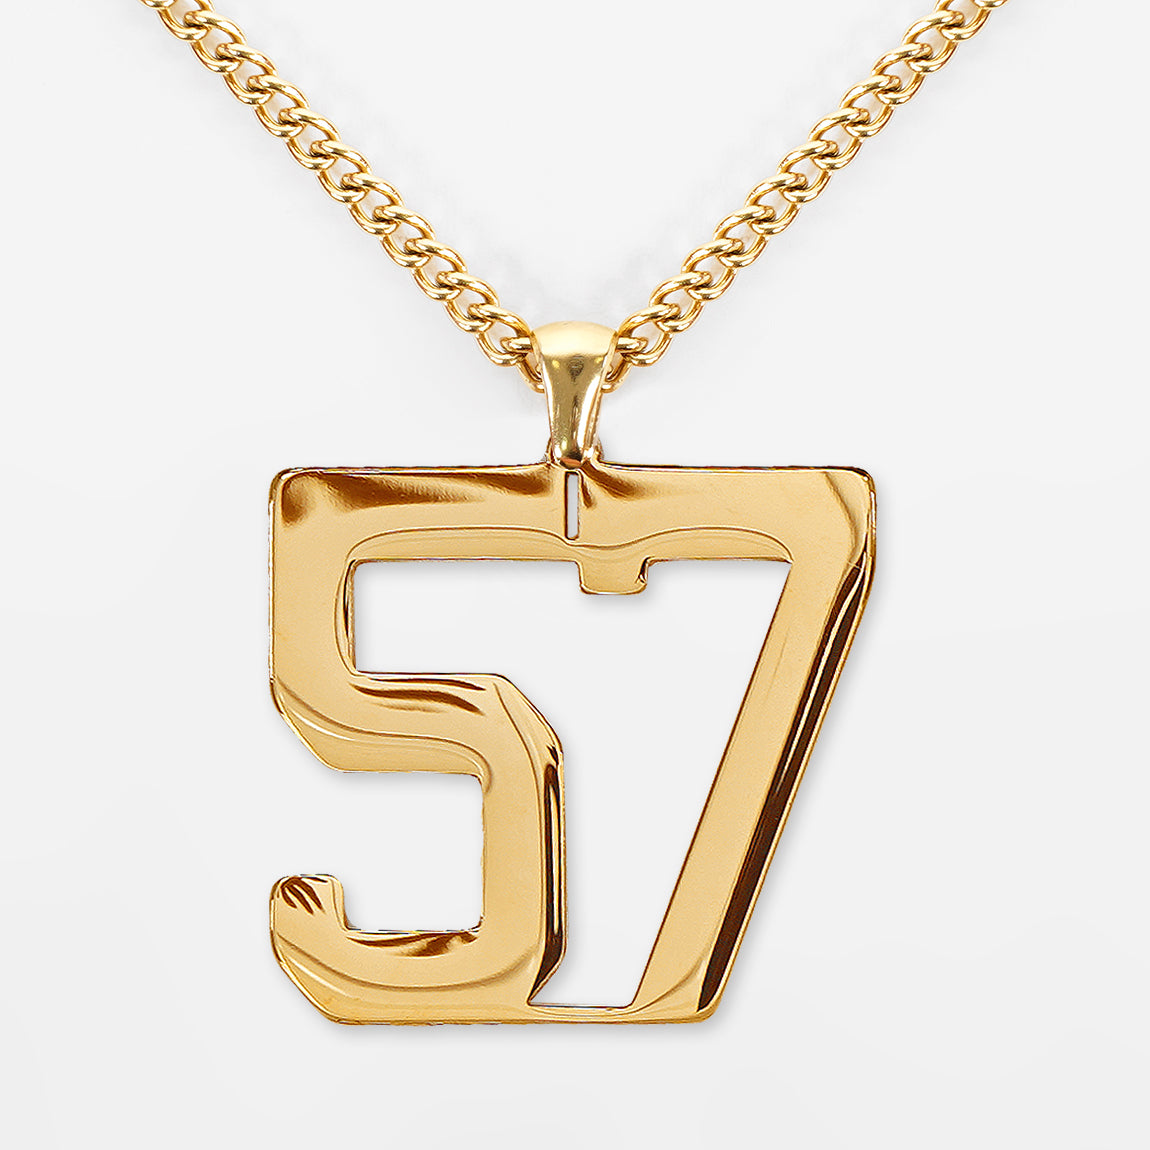 Number 12 Necklace - Jersey Number Pendant - Sports Jewelry - Gift for Athletes